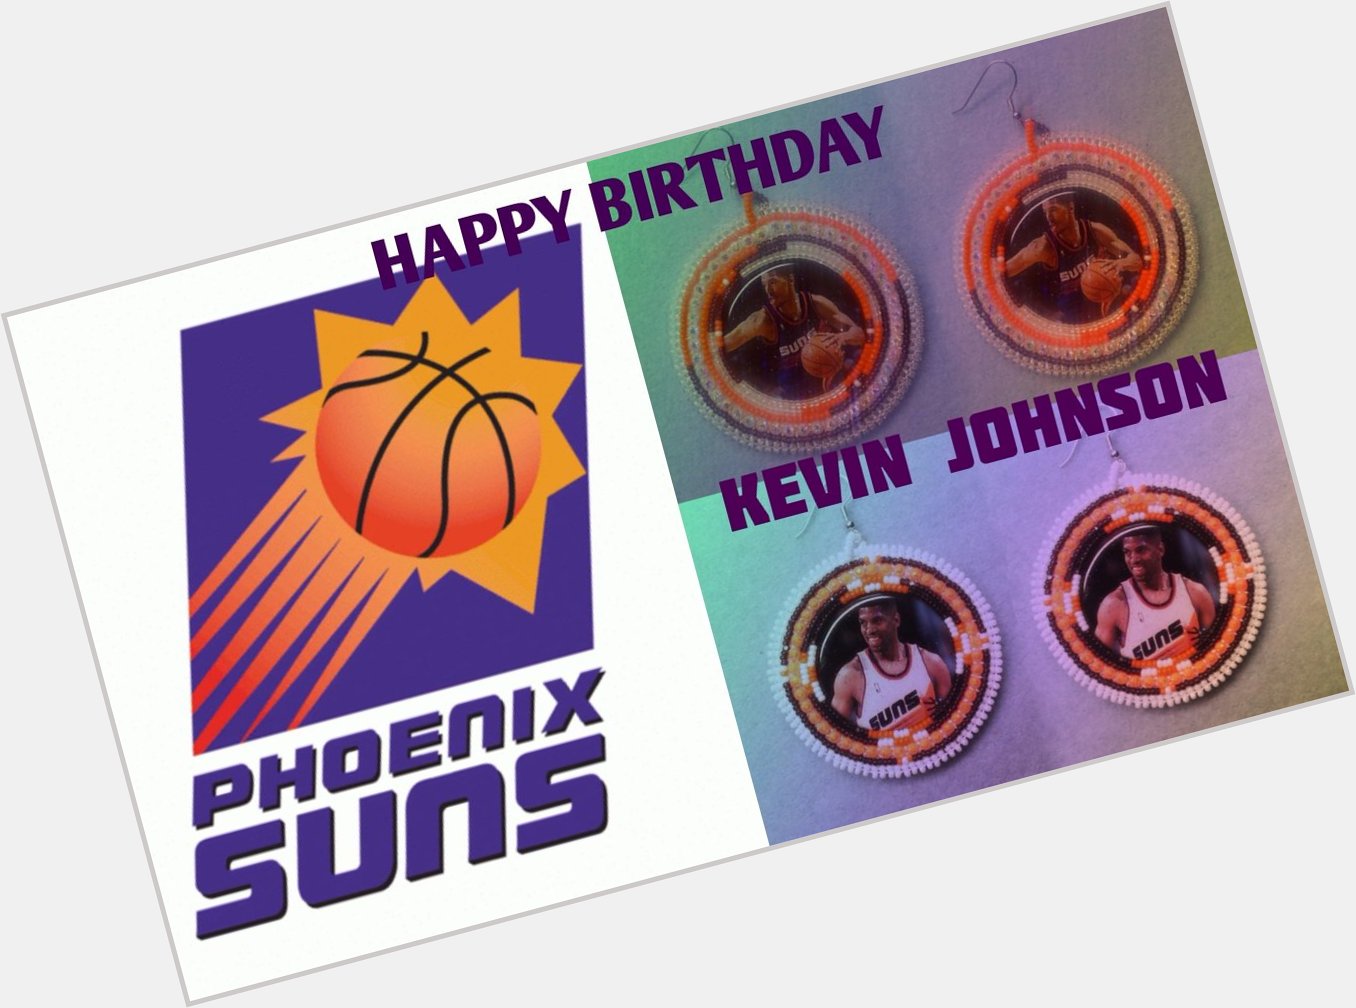  Happy Birthday to former 3x All Star PHX Suns Basketball Player and Mayor Kevin Johnson. 